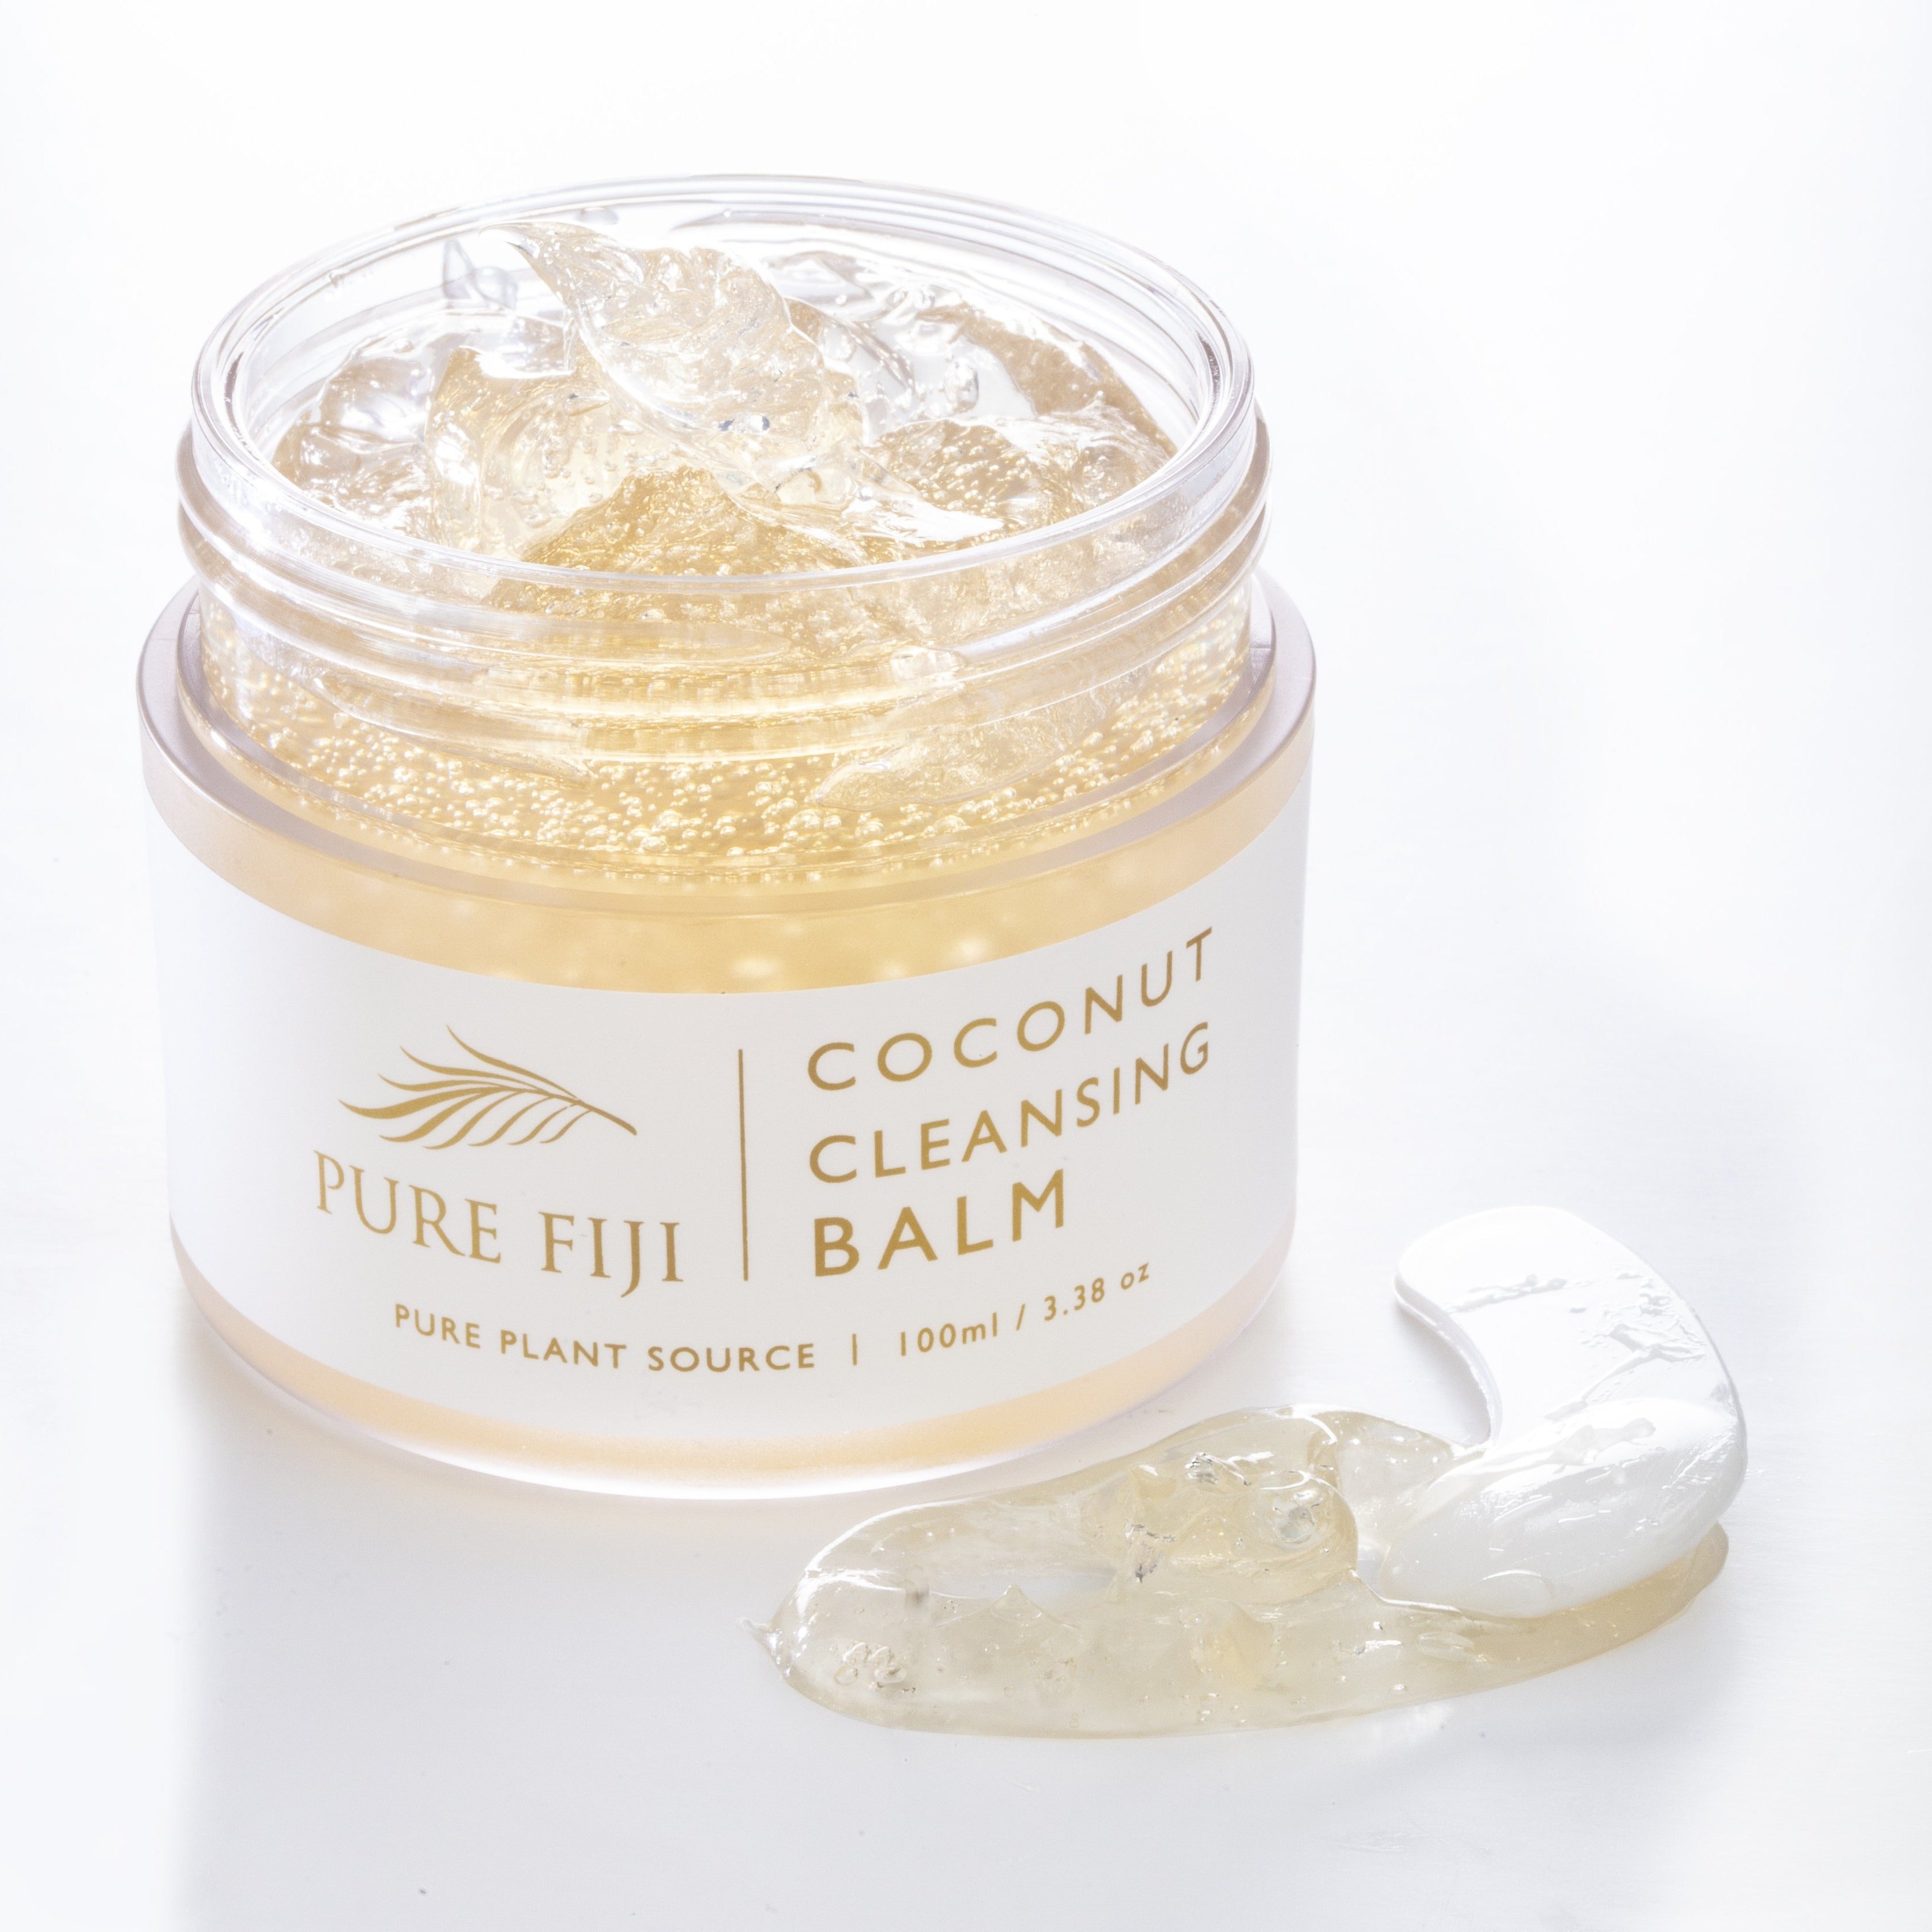 Pure Fiji Coconut Cleansing Balm